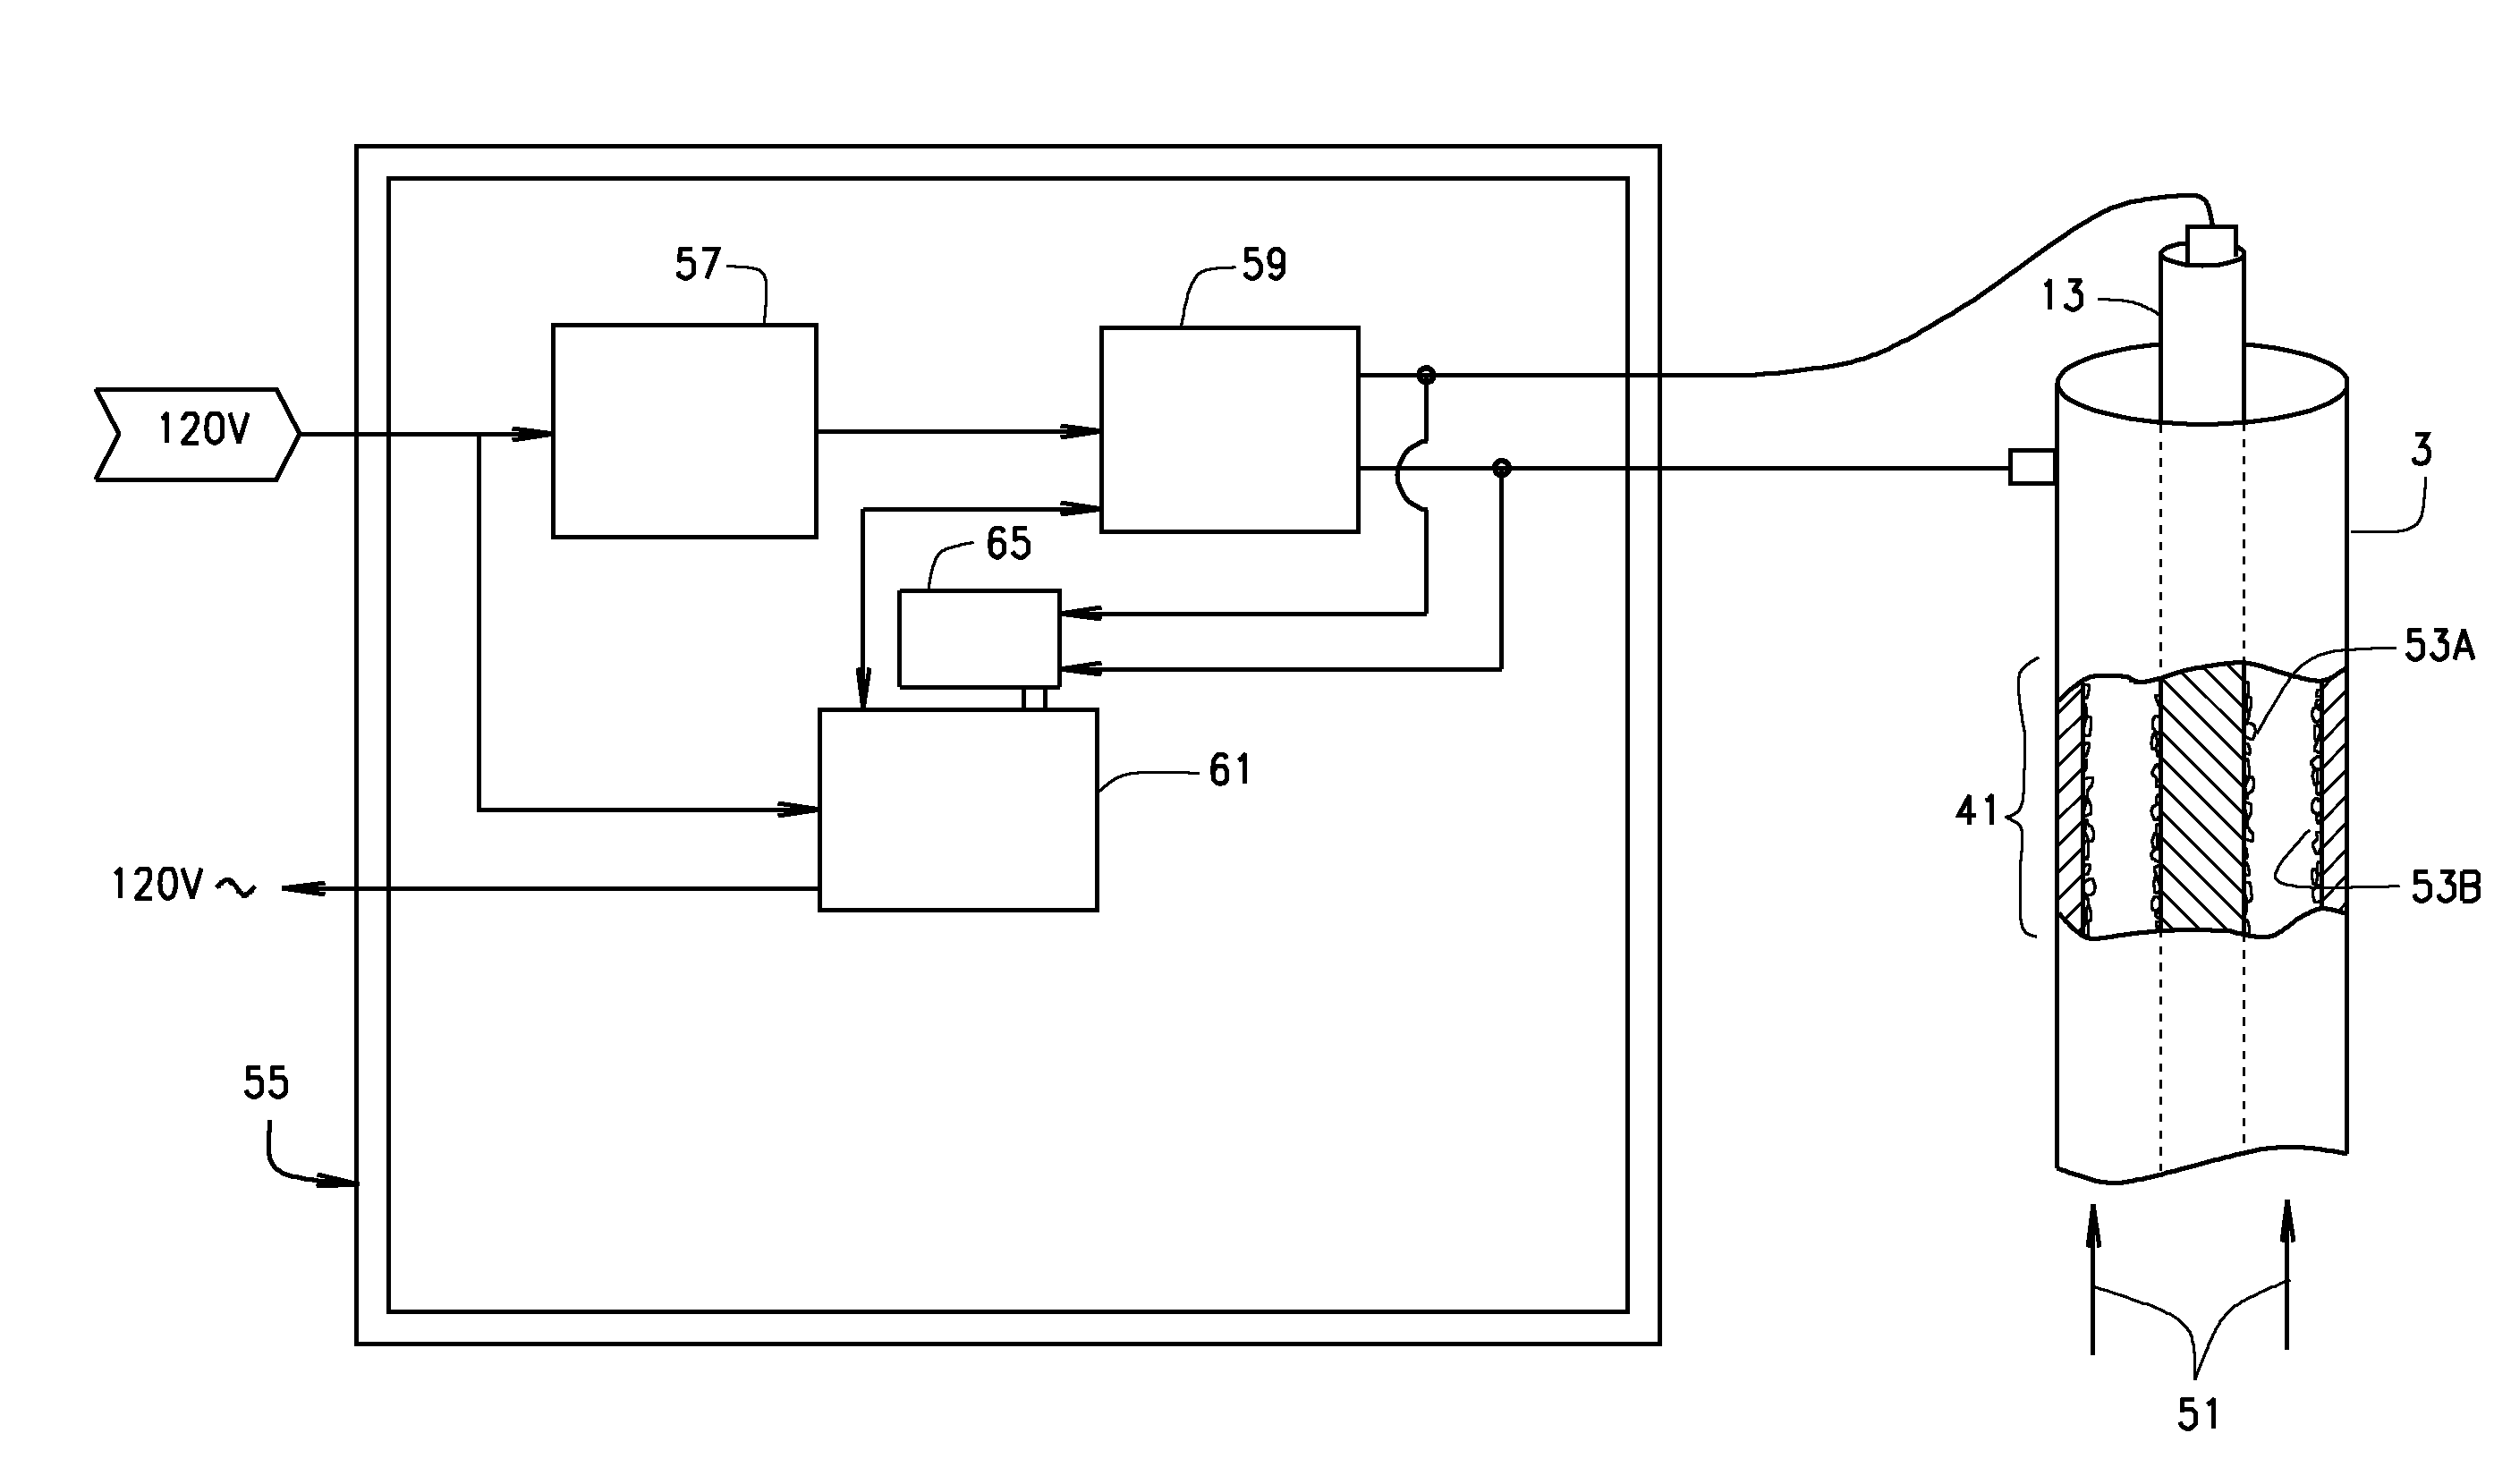 Method and Apparatus for the Purification and Analytical Evaluation of Highly Purified Liquids